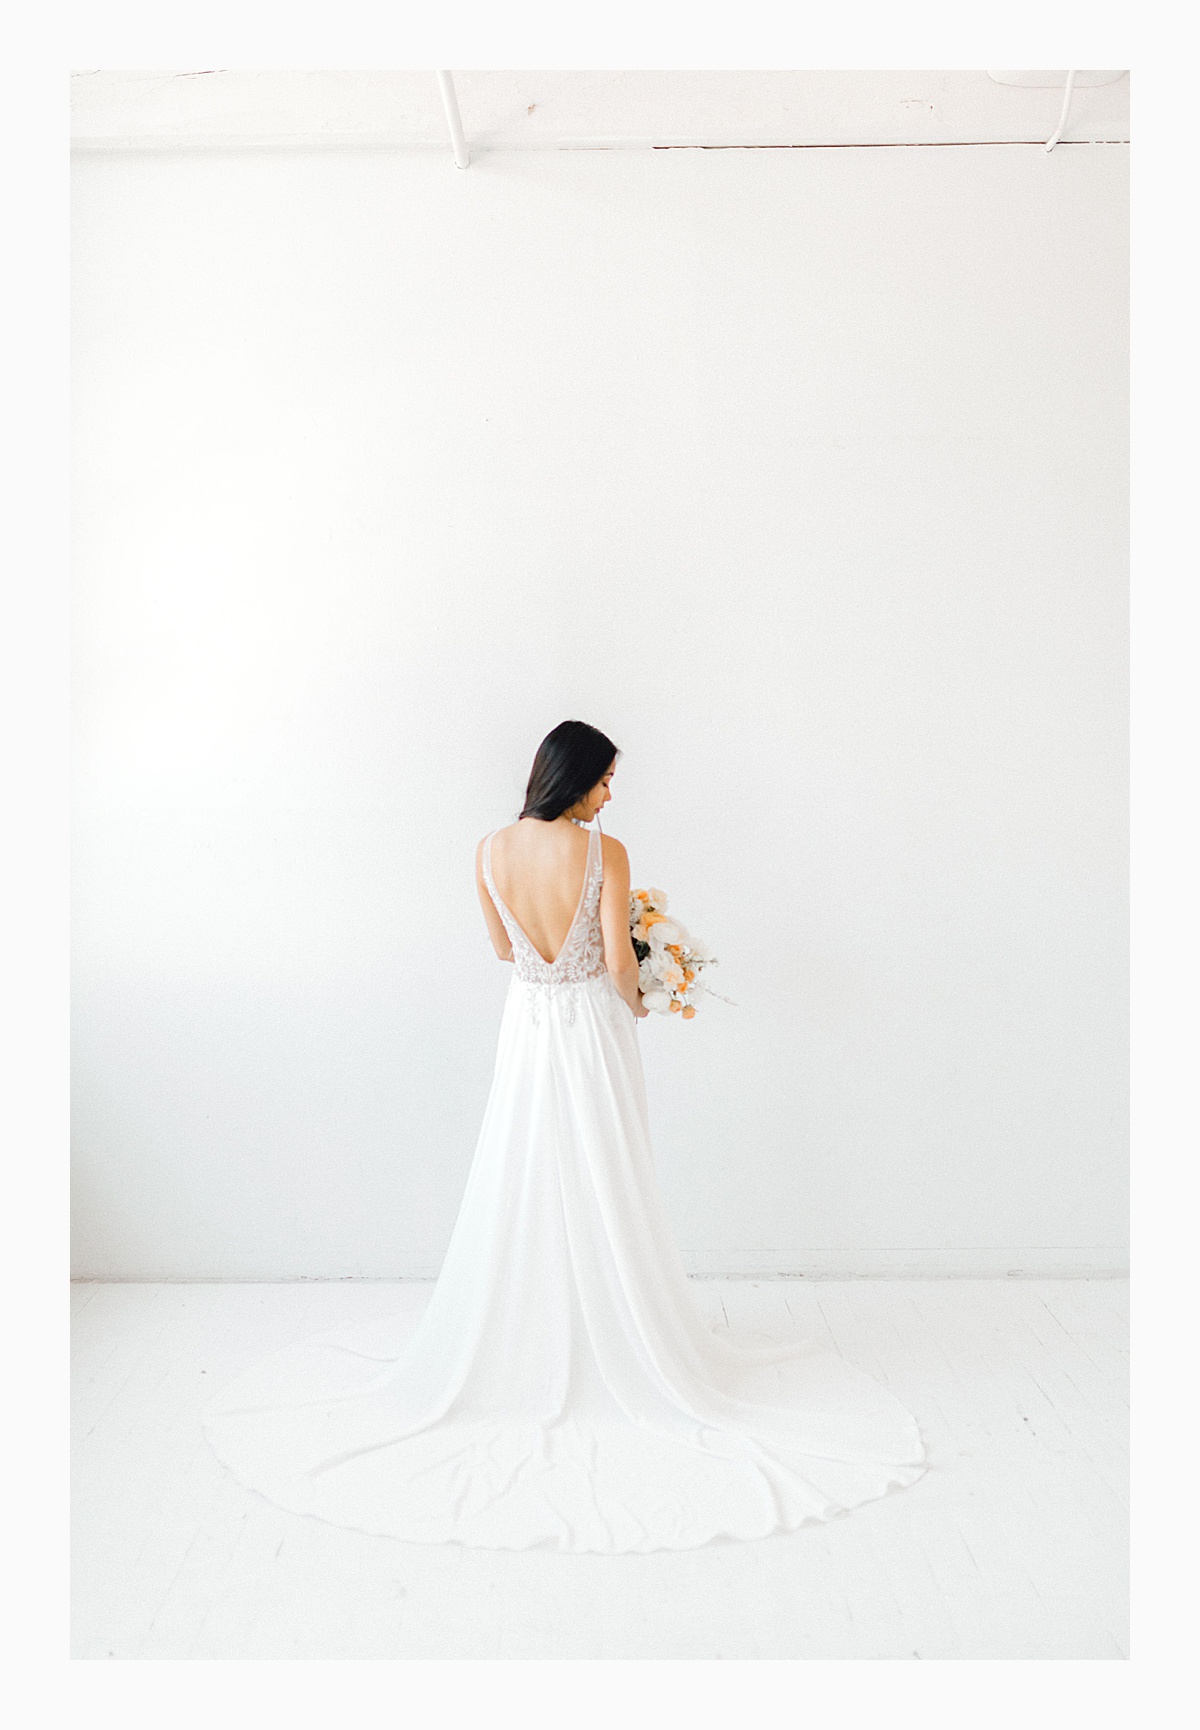 The Bemis Building in downtown Seattle is one of my favorite places to use for photo shoots!  This styled bridal shoot with touches of peach and white was dreamy.  #emmarosecompany #kindredpresets #seattlebride_0023.jpg